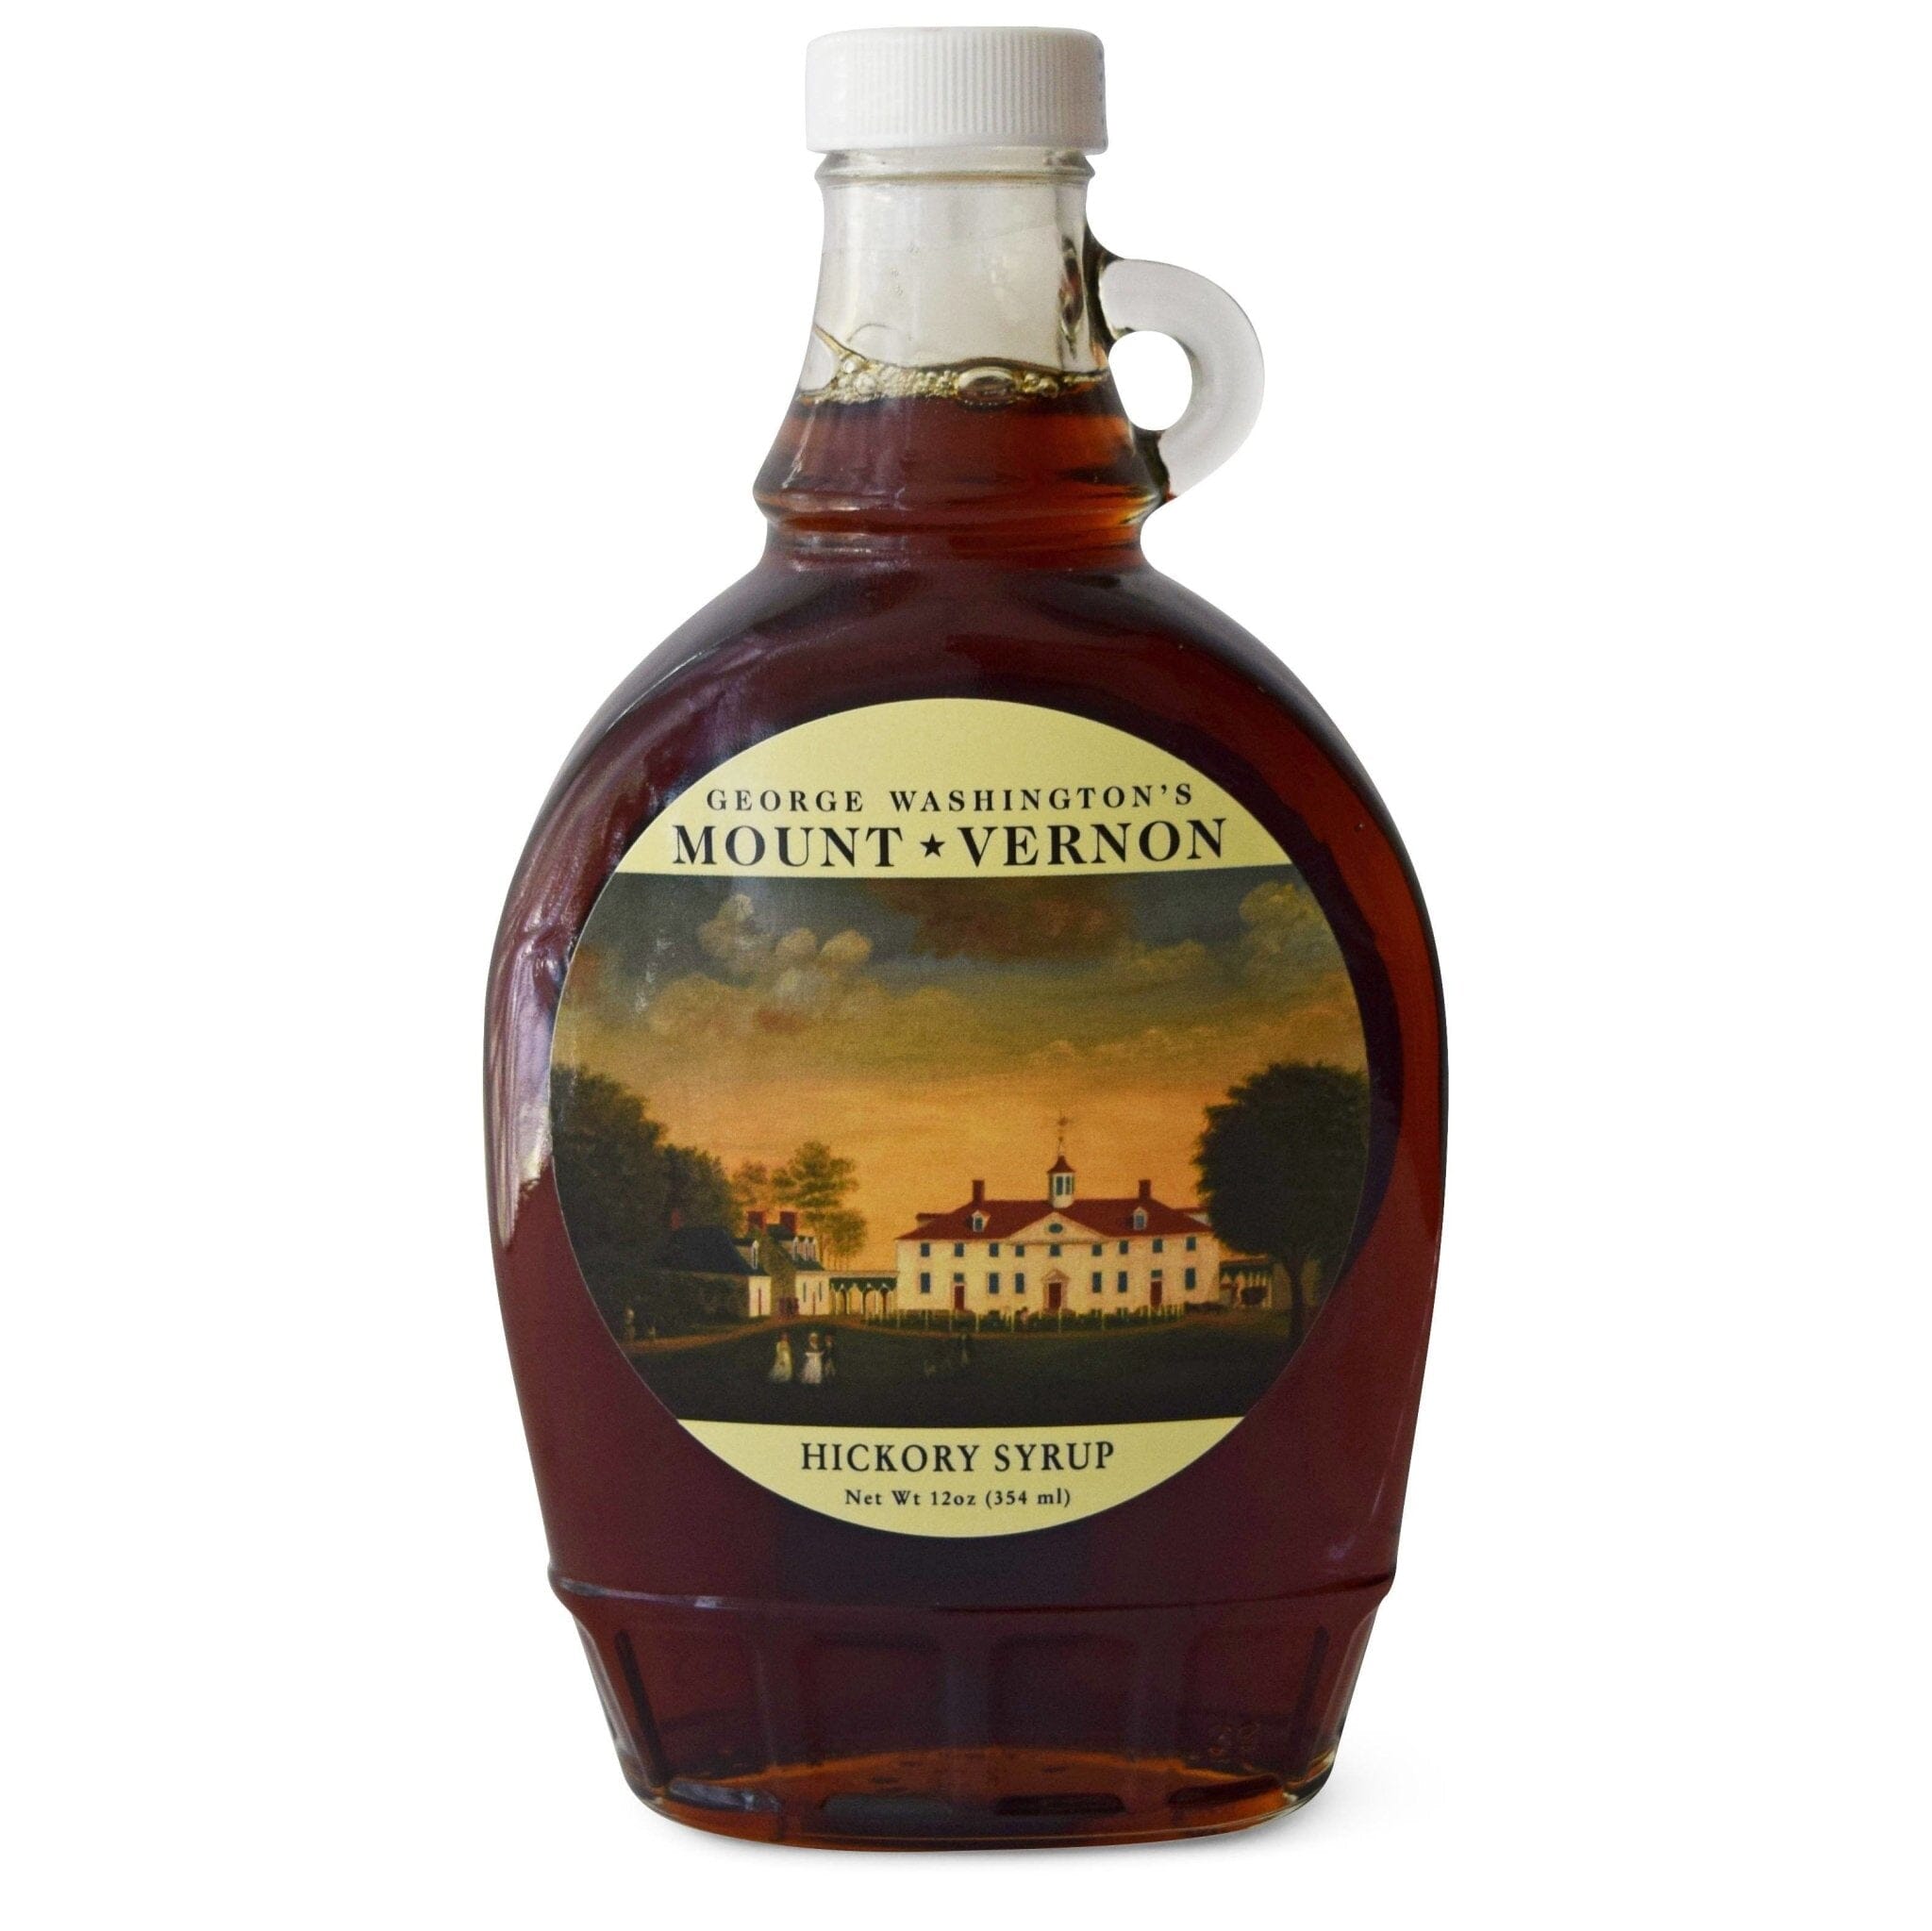 Mount Vernon Hickory Syrup